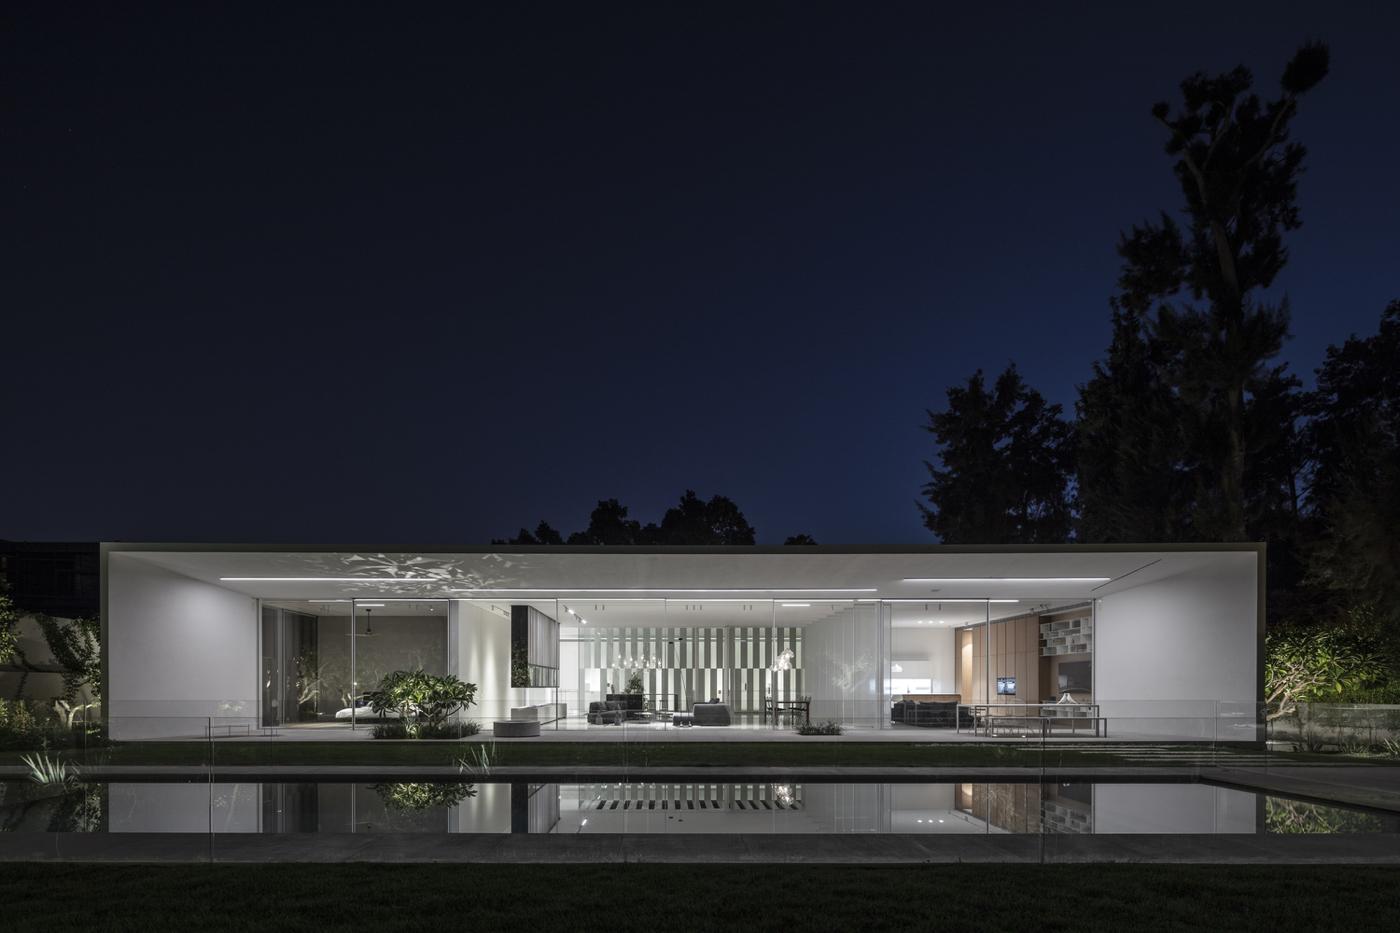 Single Family House Facade Pool Israel Architectural House